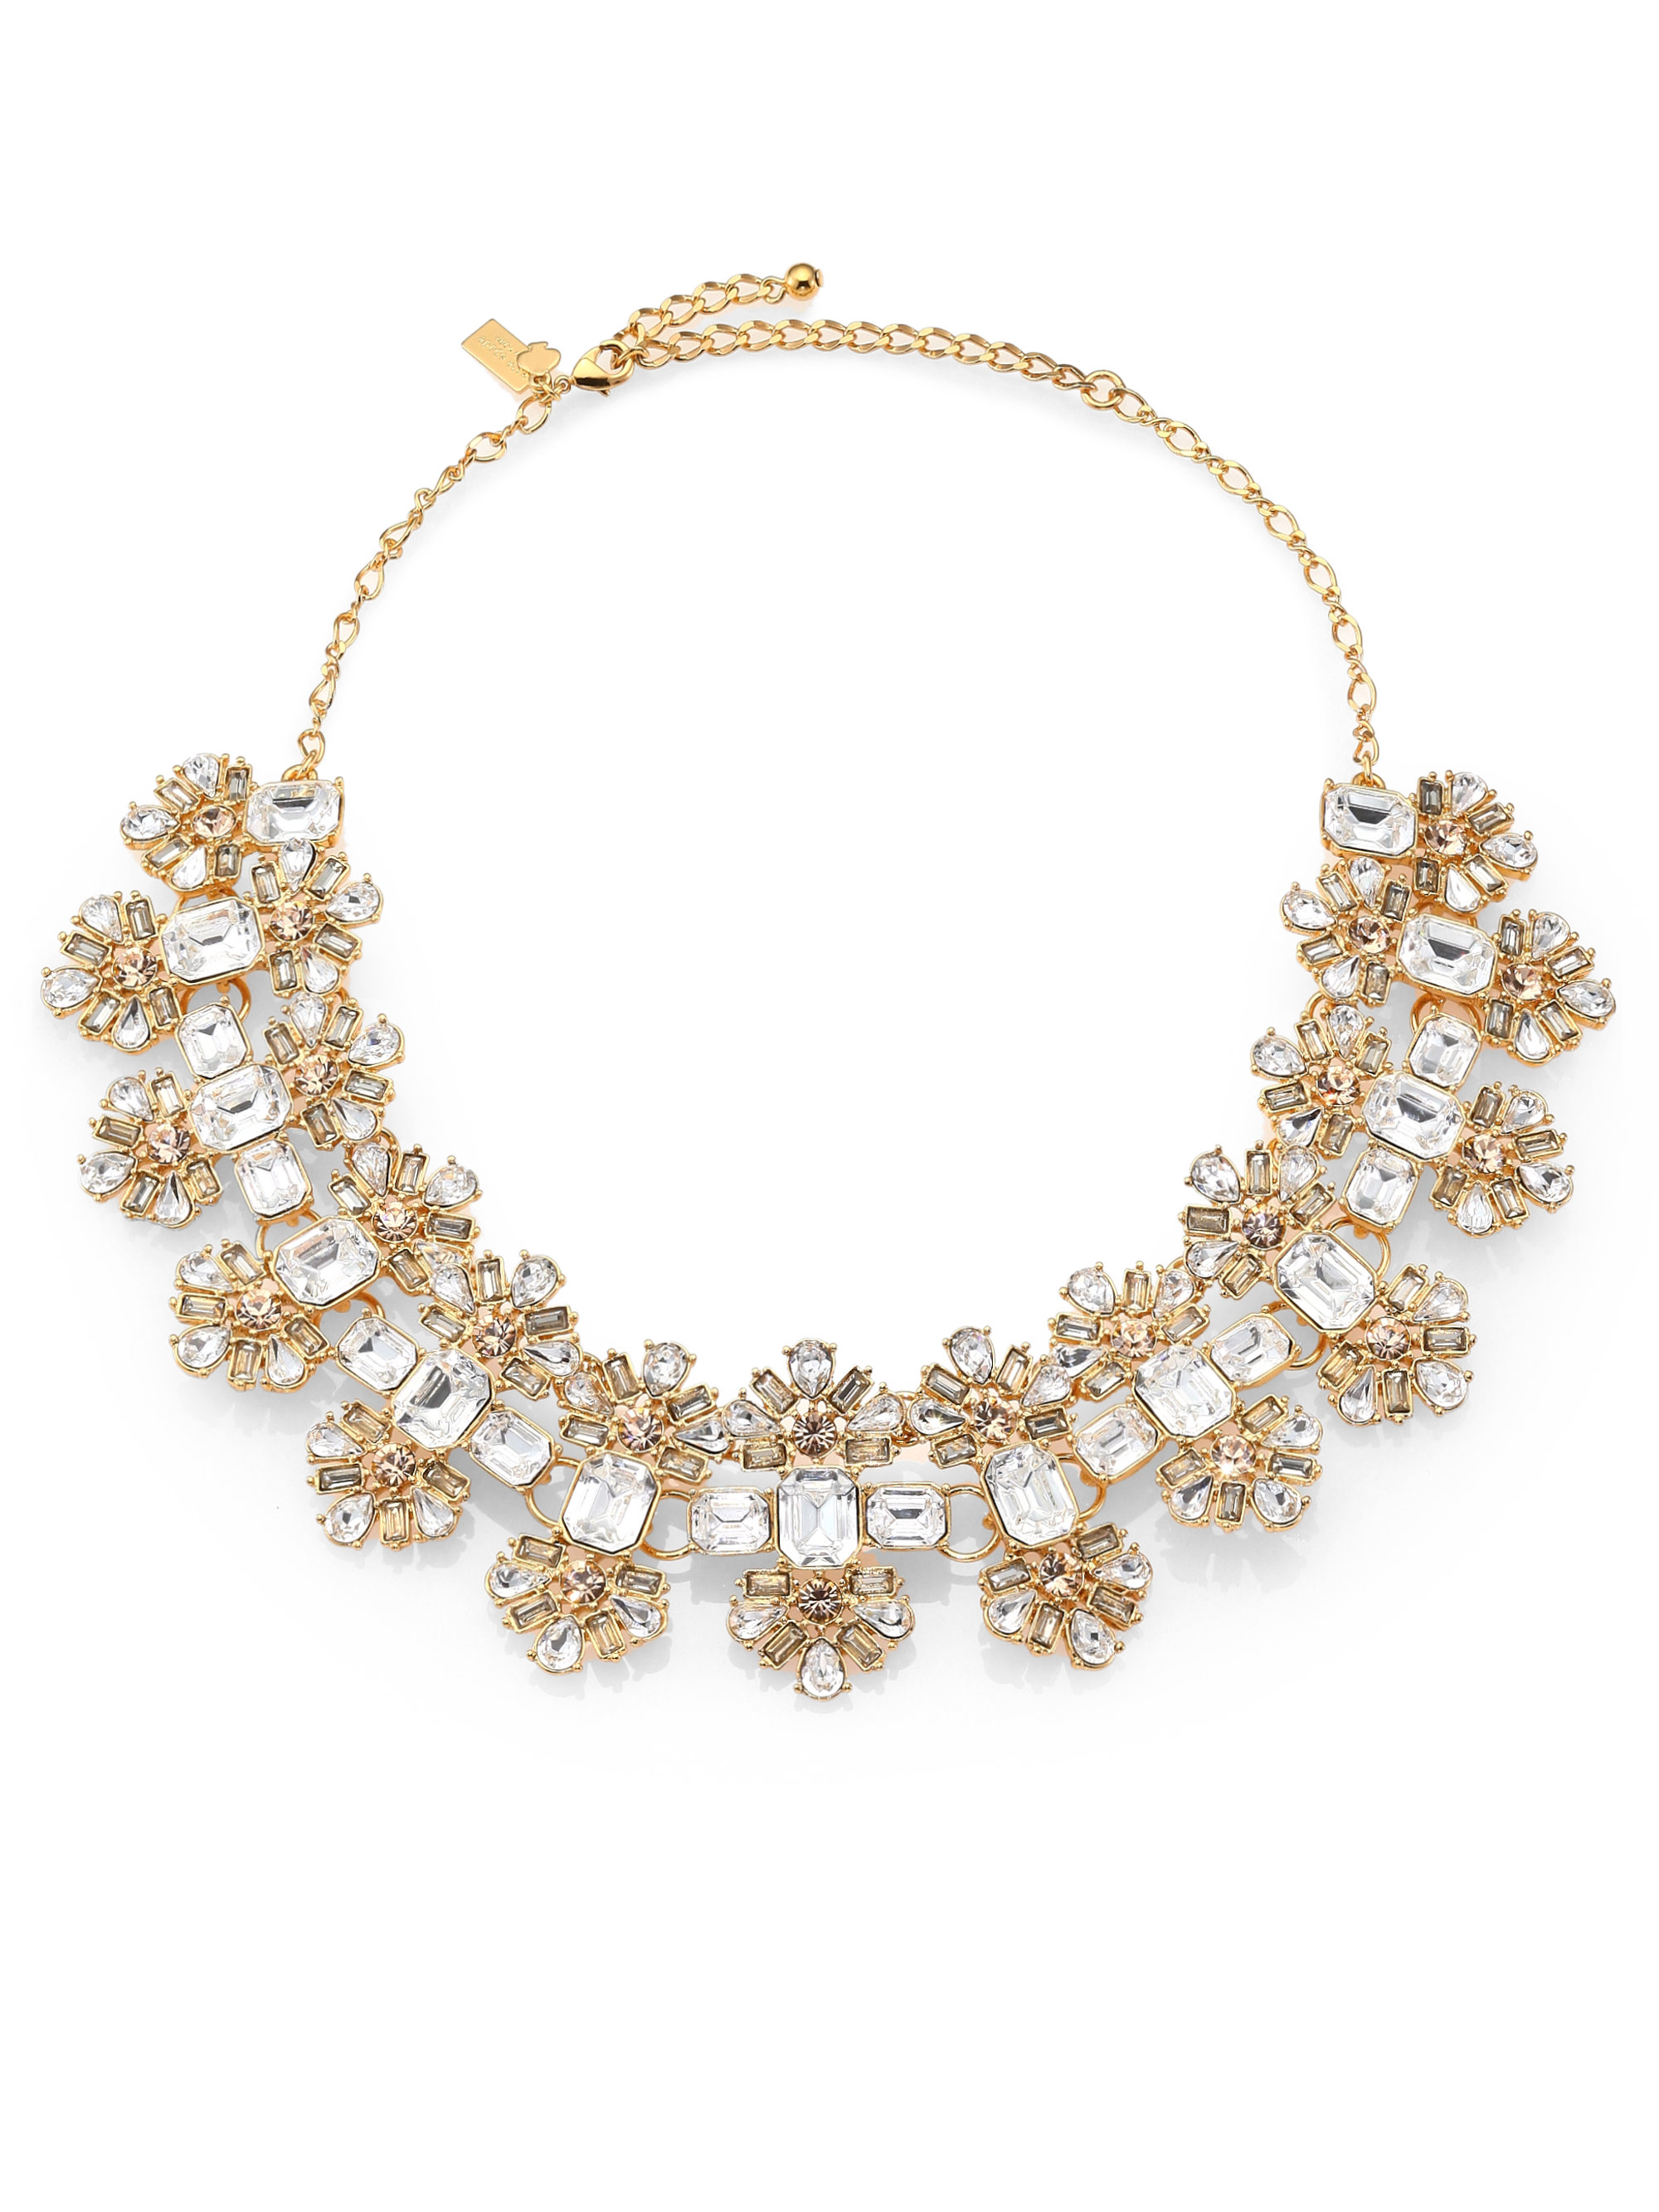 Lyst - Kate Spade New York Crystal Arches Necklace in Metallic